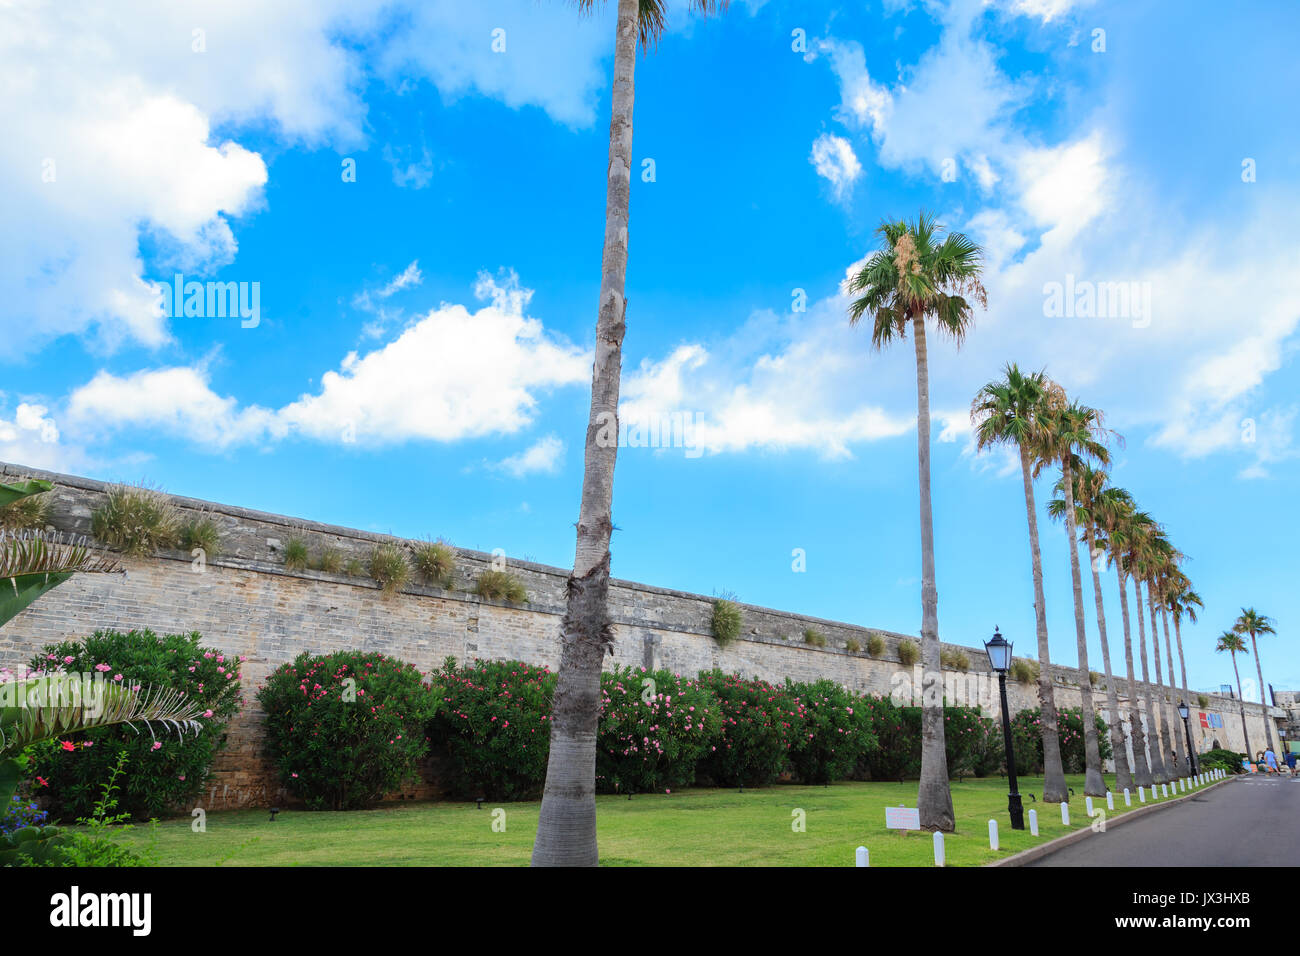 Flowers and Palm Trees Along Old Wall on Bermuda Stock Photo